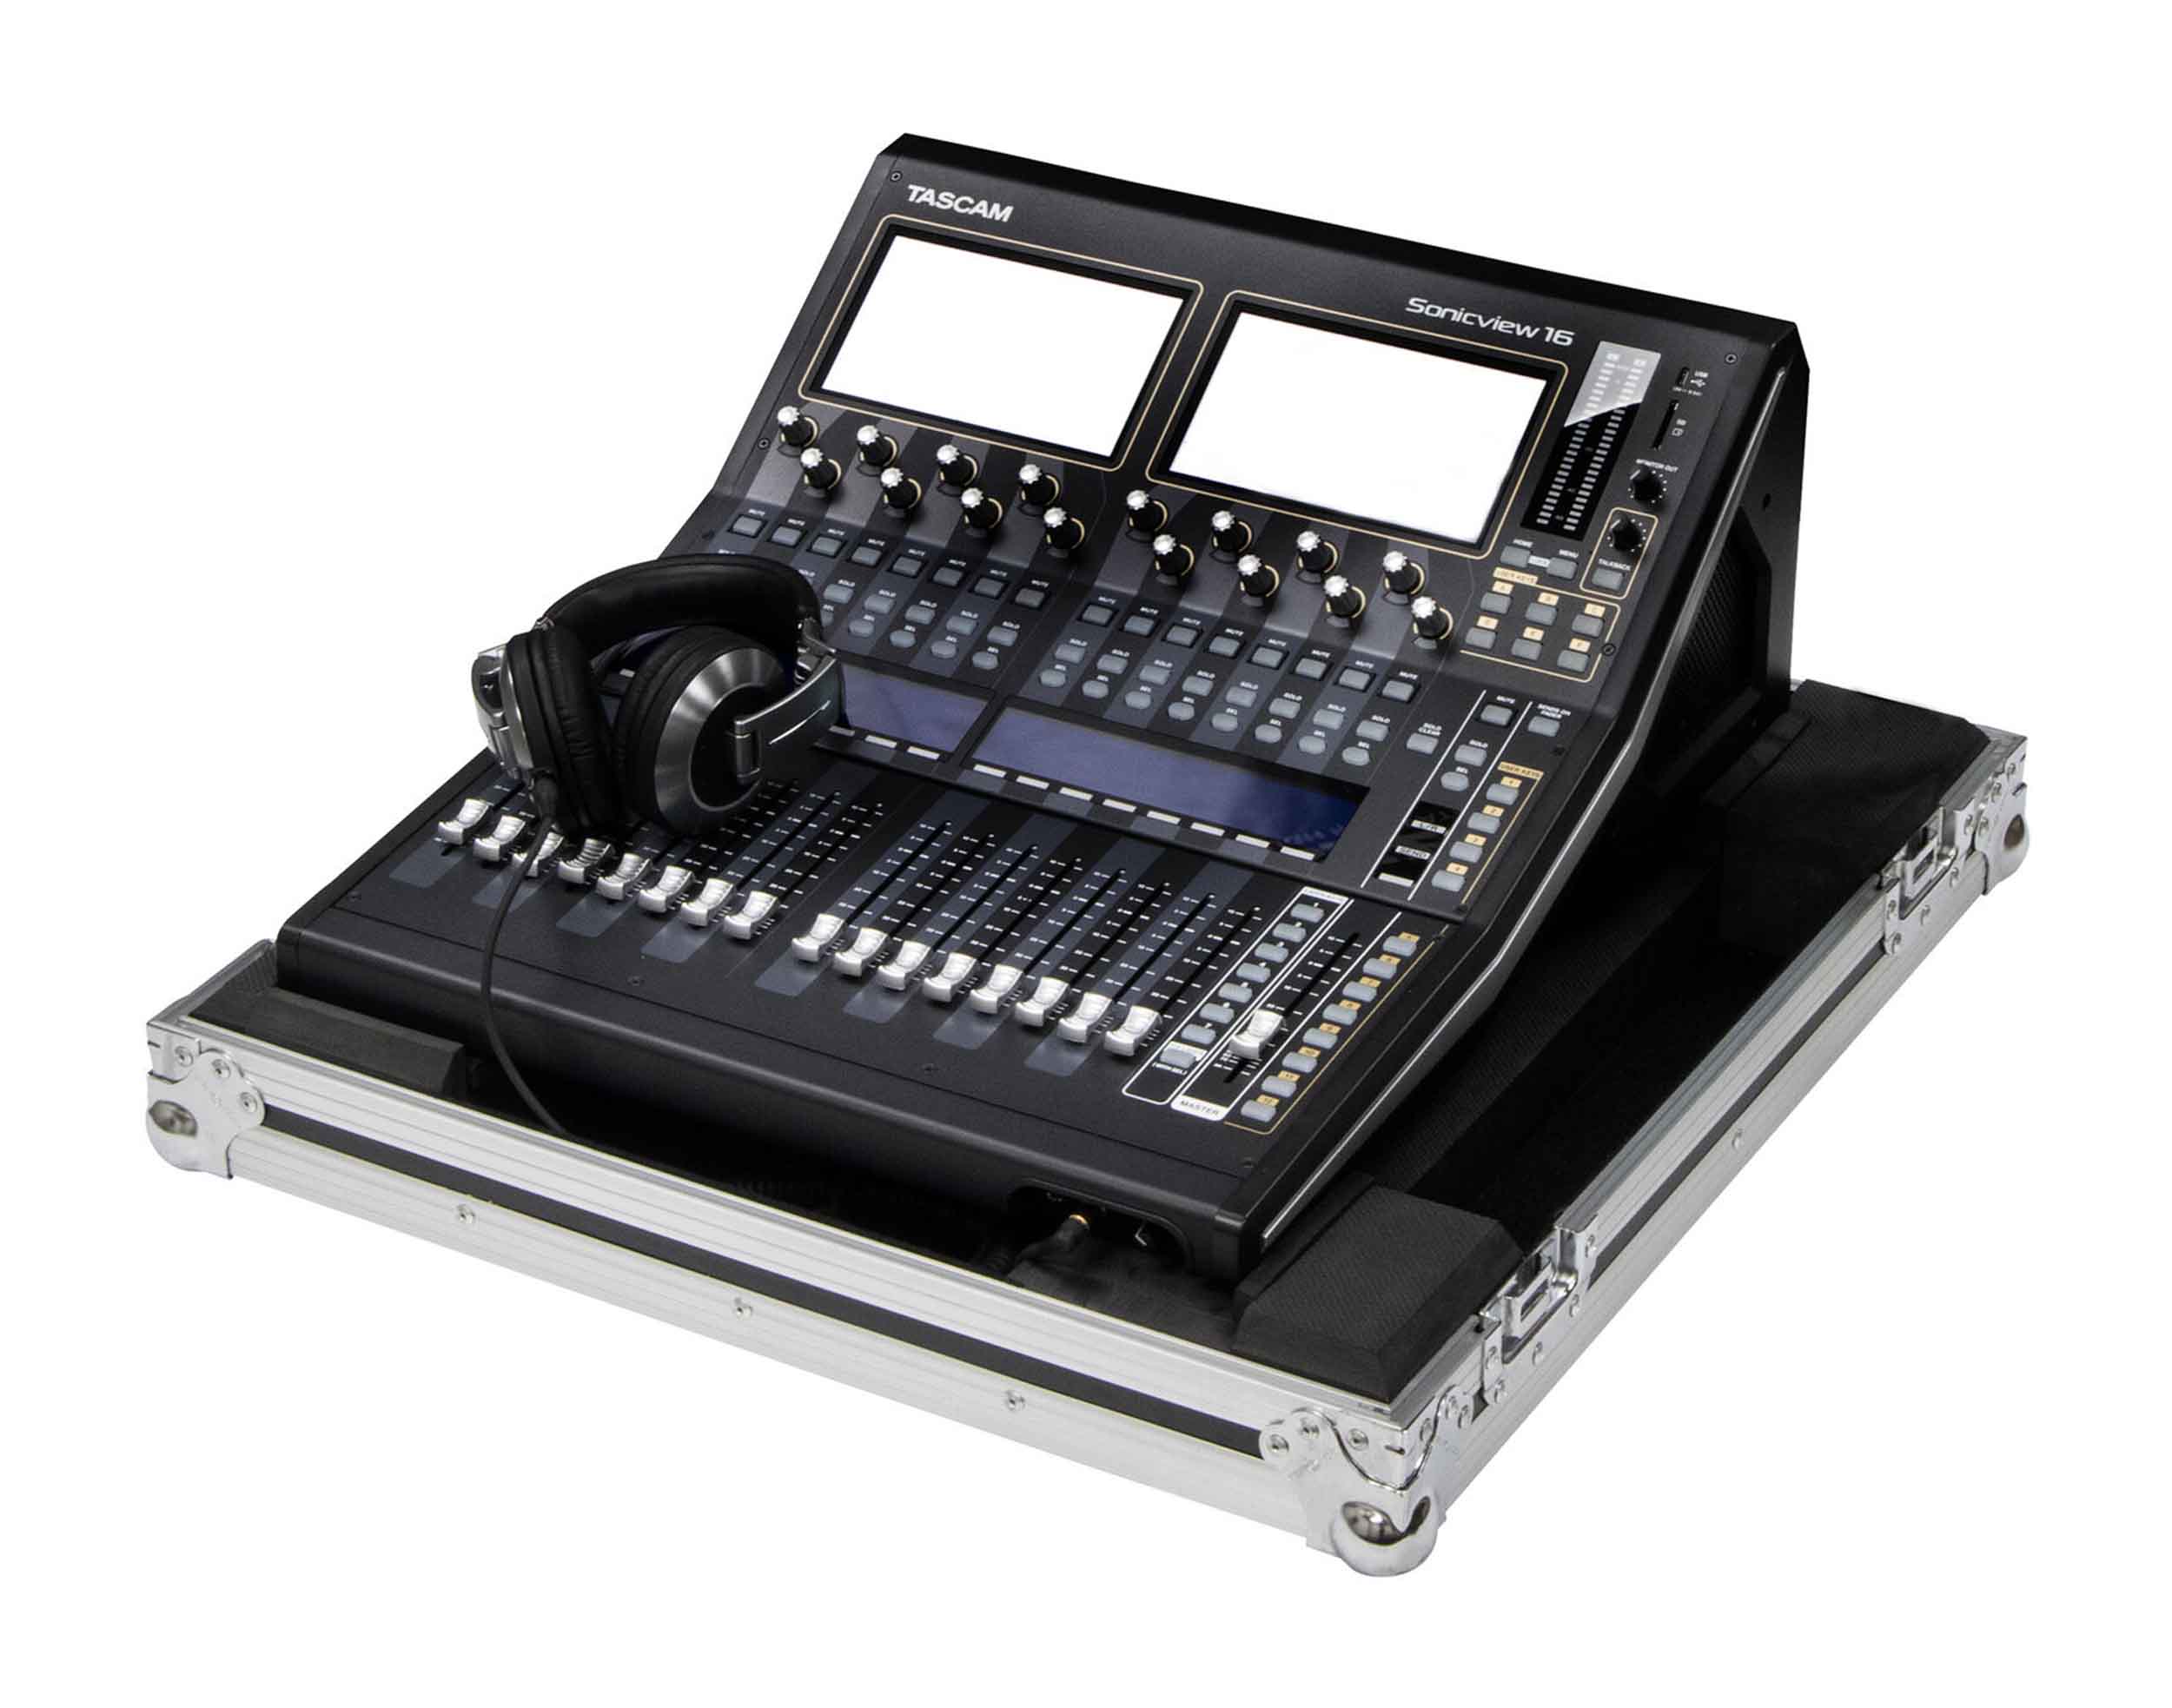 Odyssey FZSONICVIEW16, Flight Case for TASCAM Sonic View 16 Mixing Console by Odyssey